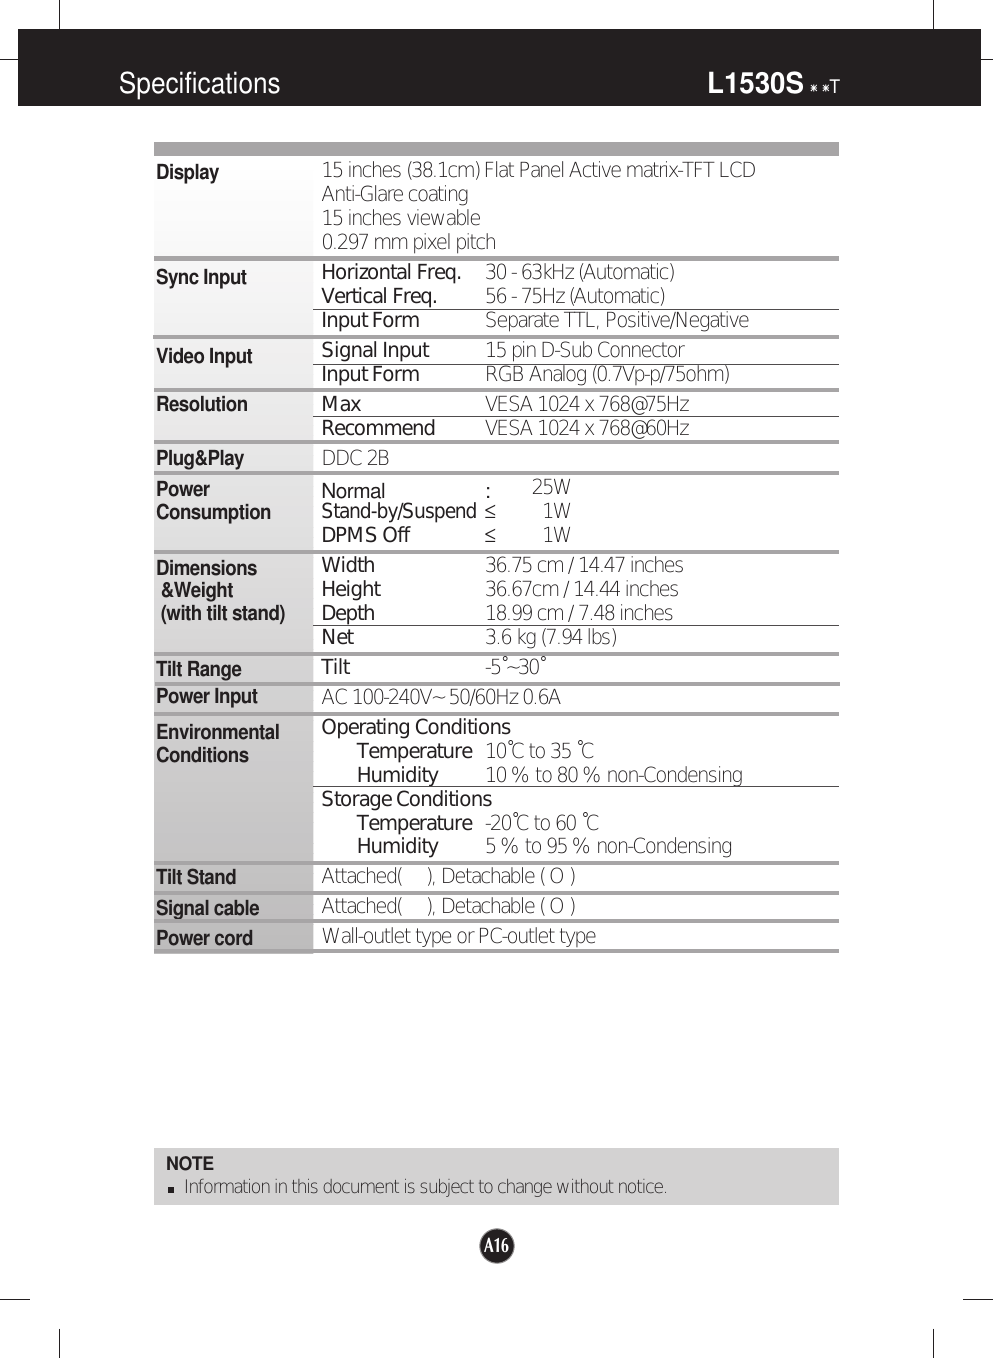 A16SpecificationsL1530S TNOTEInformation in this document is subject to change without notice.15 inches (38.1cm) Flat Panel Active matrix-TFT LCD Anti-Glare coating15 inches viewable0.297 mm pixel pitchHorizontal Freq. 30 - 63kHz (Automatic)Vertical Freq. 56 - 75Hz (Automatic)Input Form Separate TTL, Positive/NegativeSignal Input 15 pin D-Sub ConnectorInput Form RGB Analog (0.7Vp-p/75ohm)Max VESA 1024 x 768@75Hz Recommend VESA 1024 x 768@60HzDDC 2BNormal :25WStand-by/Suspend≤1WDPMS Off ≤1WWidth 36.75 cm / 14.47 inchesHeight 36.67cm / 14.44 inchesDepth 18.99 cm / 7.48 inchesNet 3.6 kg (7.94 lbs)Tilt -5˚~30˚AC 100-240V~ 50/60Hz 0.6AOperating ConditionsTemperature 10˚C to 35 ˚CHumidity 10 % to 80 % non-CondensingStorage ConditionsTemperature -20˚C to 60 ˚CHumidity 5 % to 95 % non-CondensingAttached(     ), Detachable ( O )Attached(     ), Detachable ( O )Wall-outlet type or PC-outlet typeDisplaySync InputVideo InputResolutionPlug&amp;PlayPowerConsumptionDimensions&amp;Weight(with tilt stand)Tilt RangePower InputEnvironmentalConditionsTilt StandSignal cablePower cord 